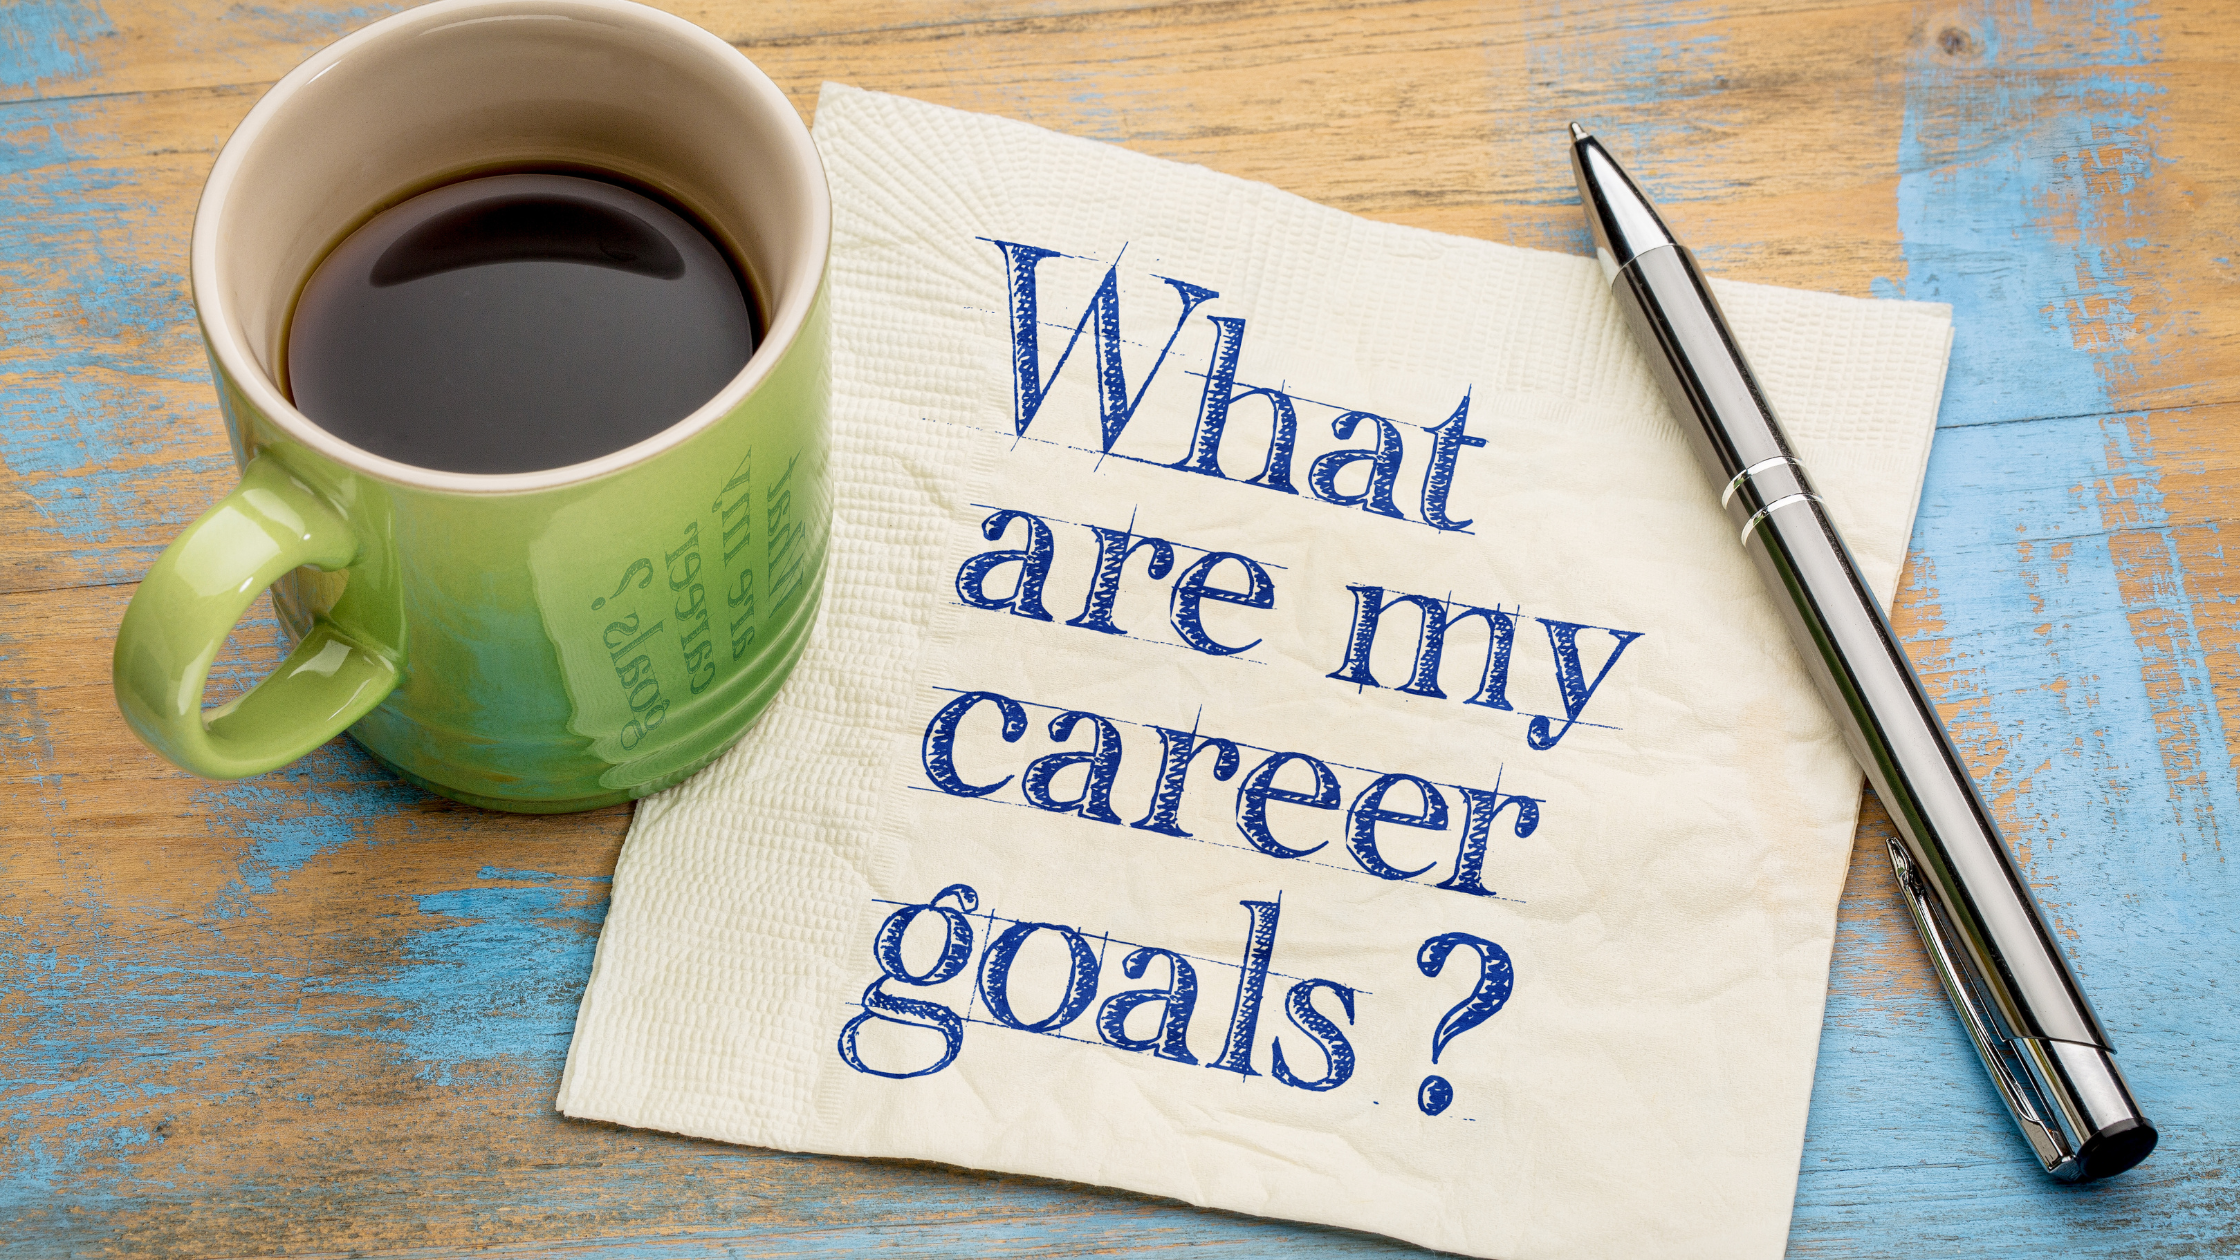 Career progression: 4 tips for moving your career forward